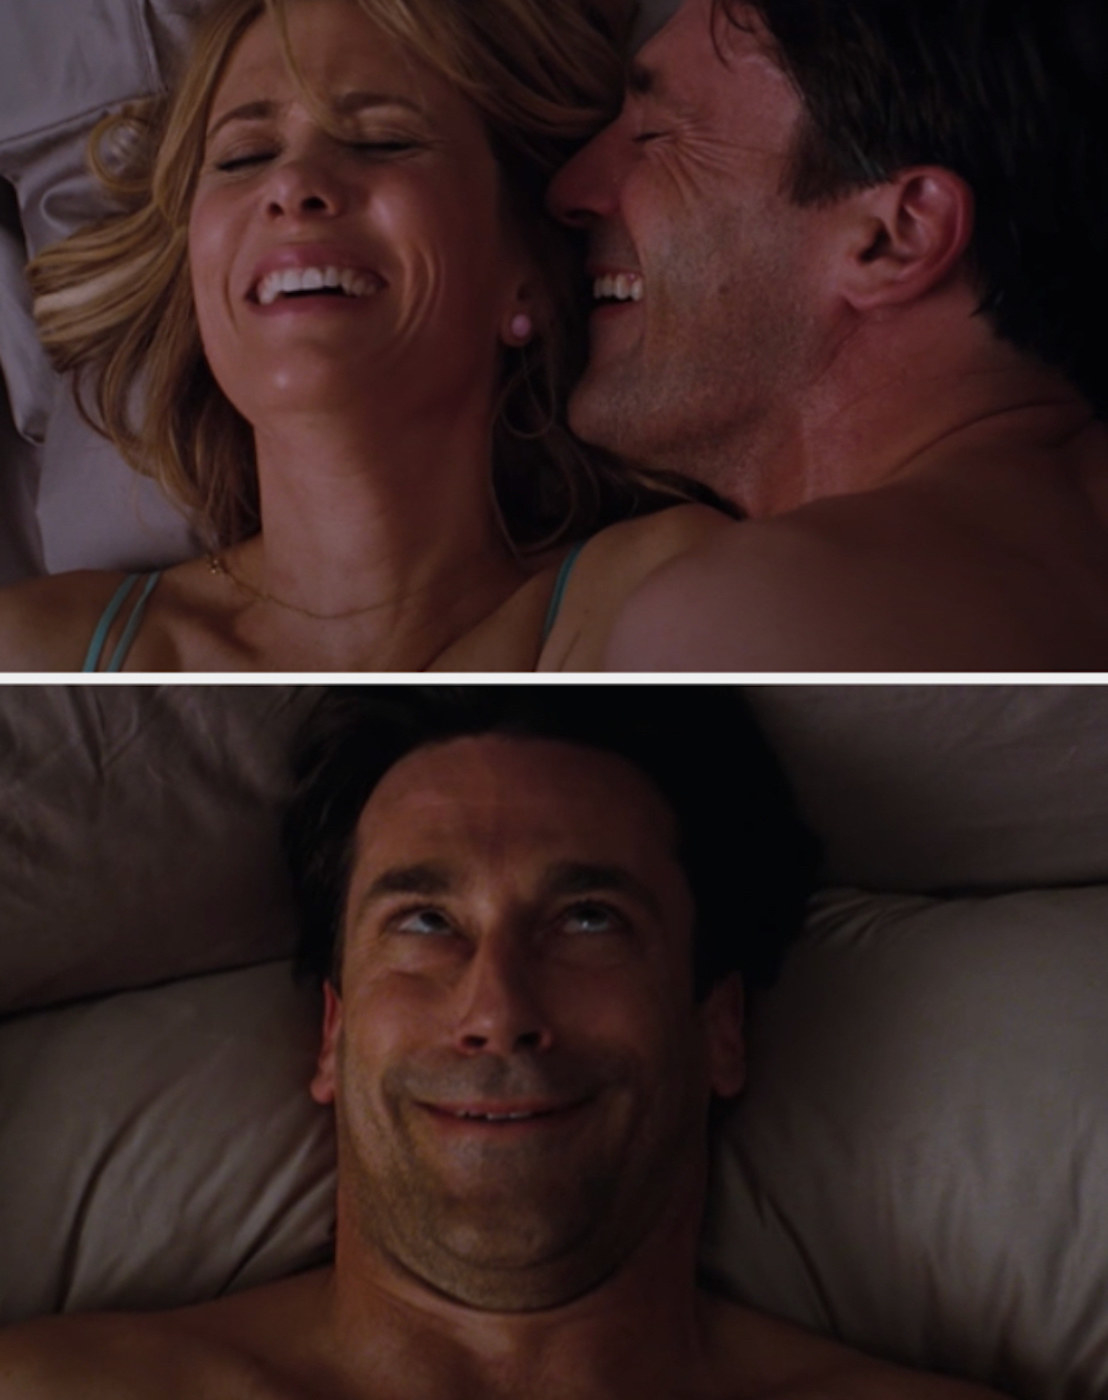 Kristen Wiig and Jon Hamm in a sex scene from &quot;Bridesmaids&quot;